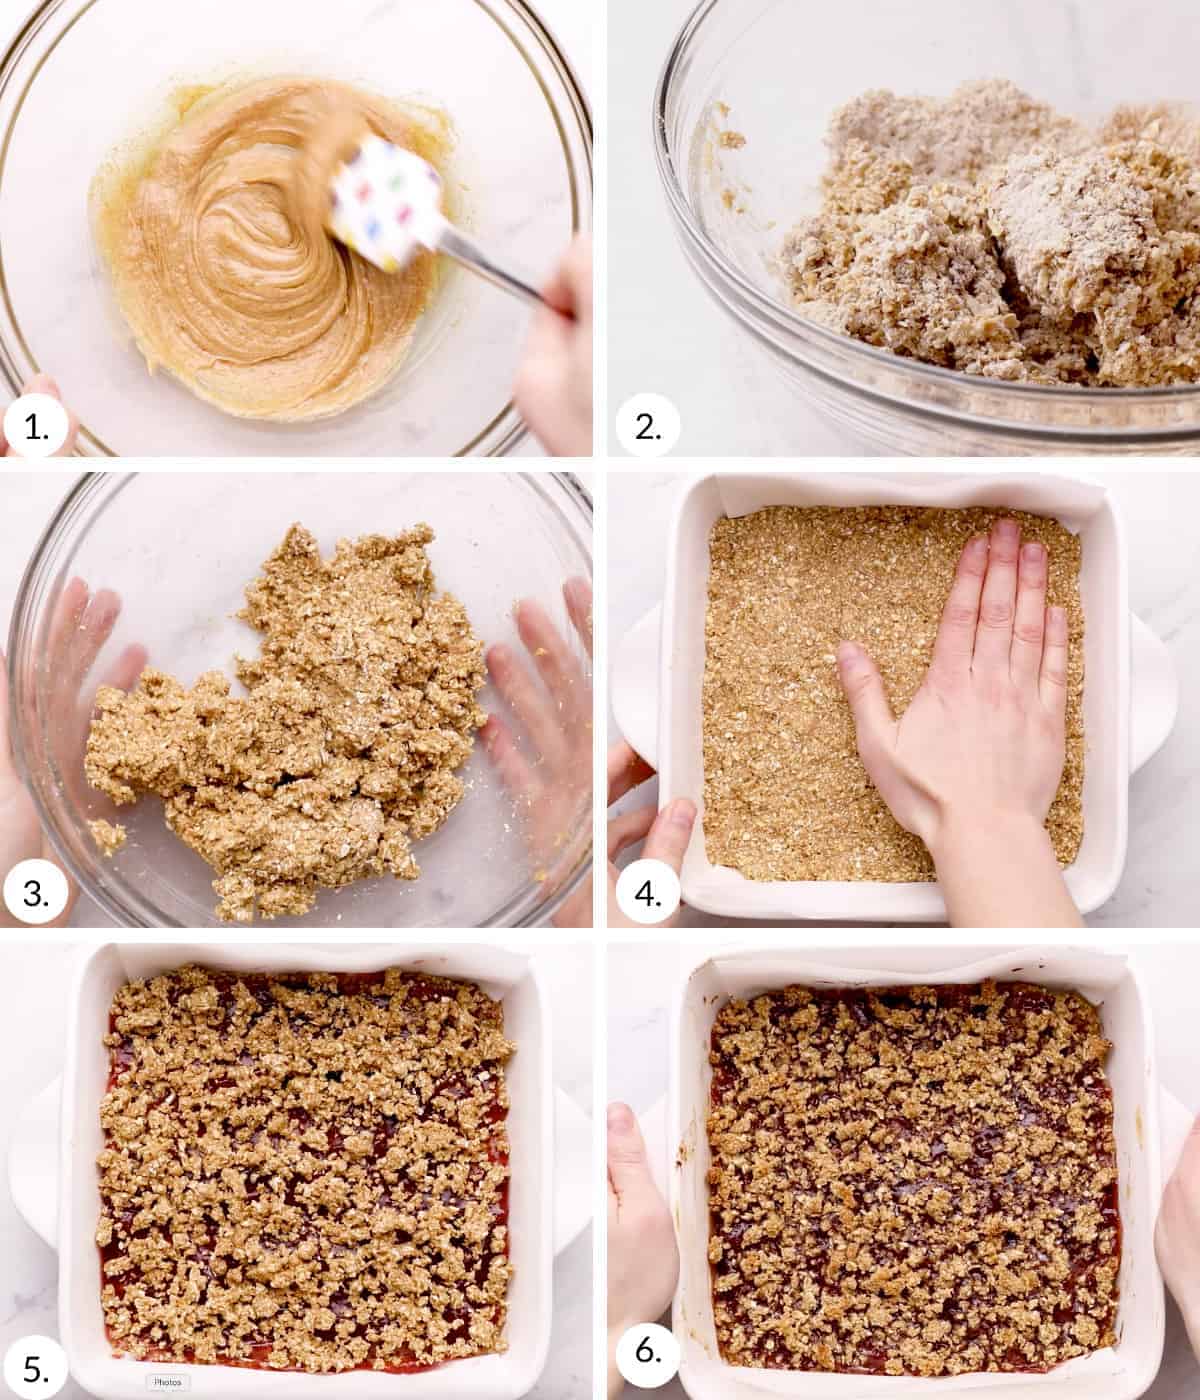 how to make healthy breakfast bars step by step process